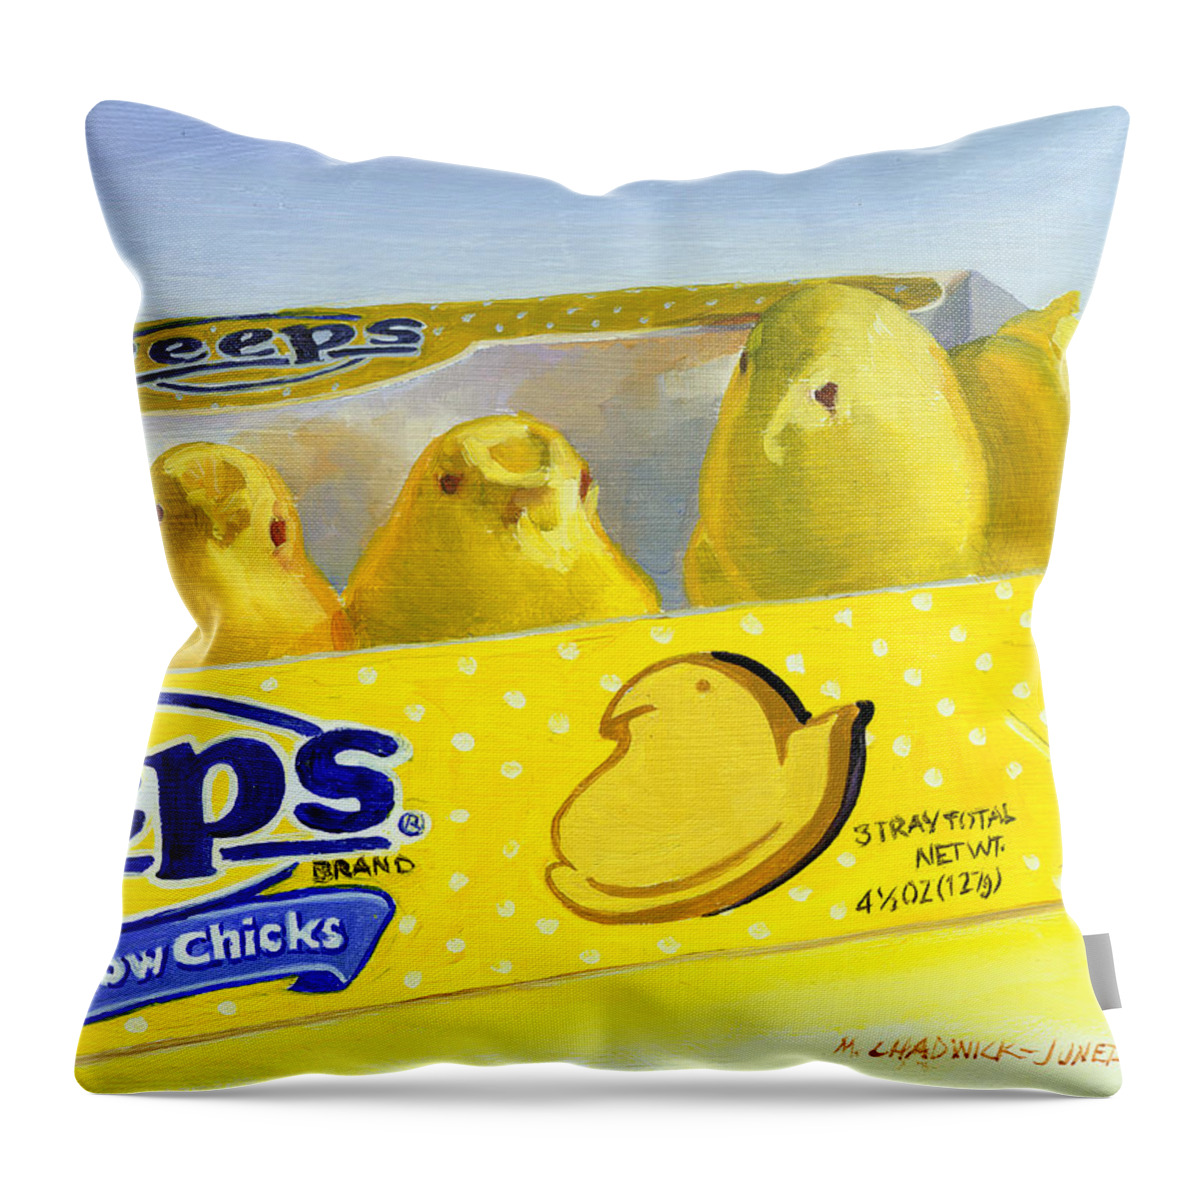 Peeps Throw Pillow featuring the painting Rebel Chick by Marguerite Chadwick-Juner